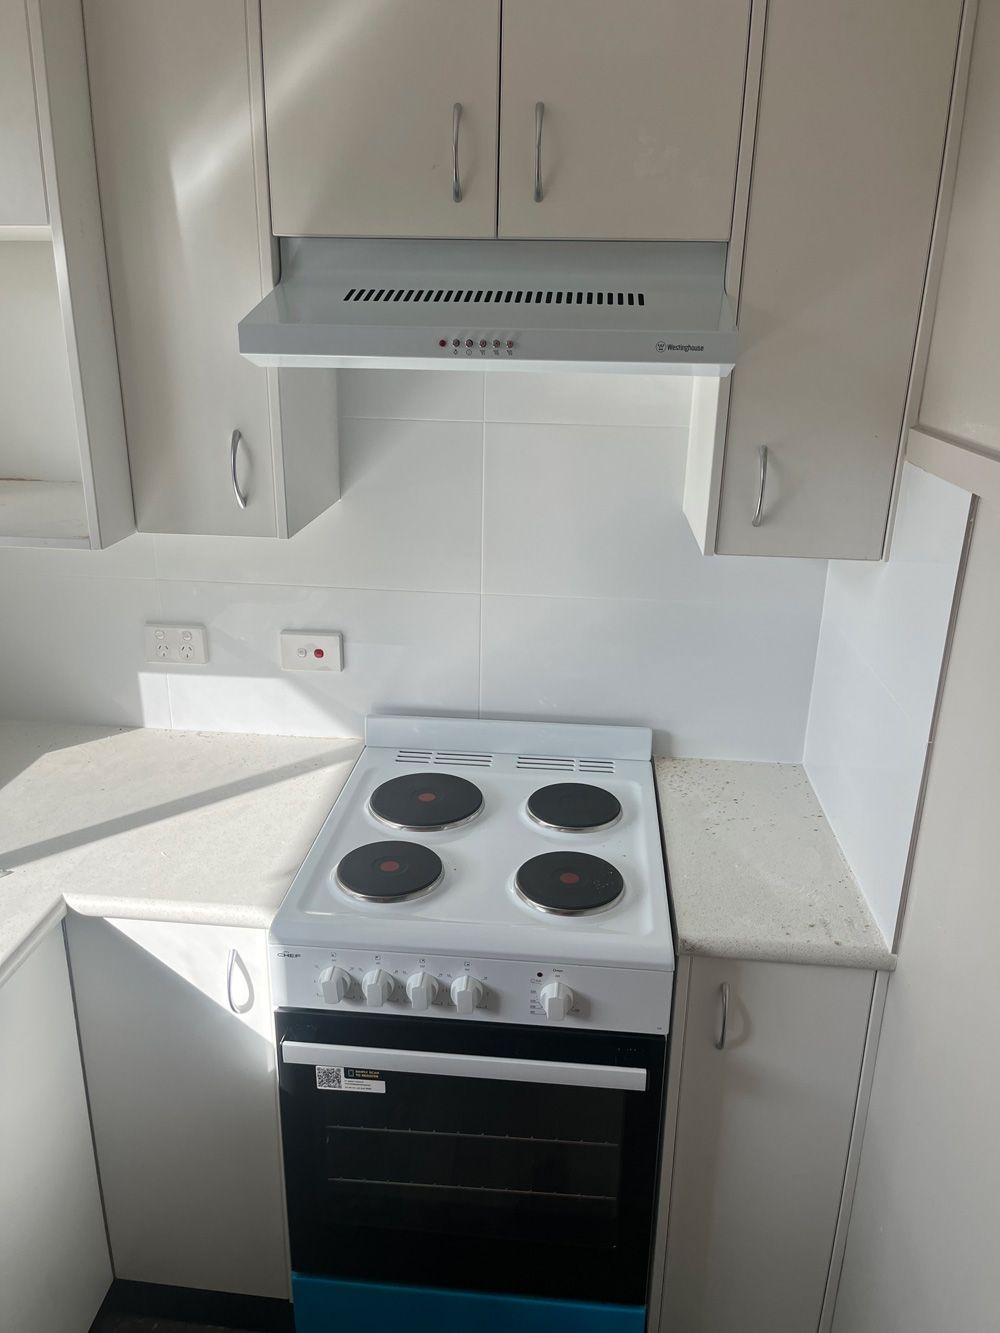 A New Gas Stove with Oven — Electrician in Kempsey, NSW